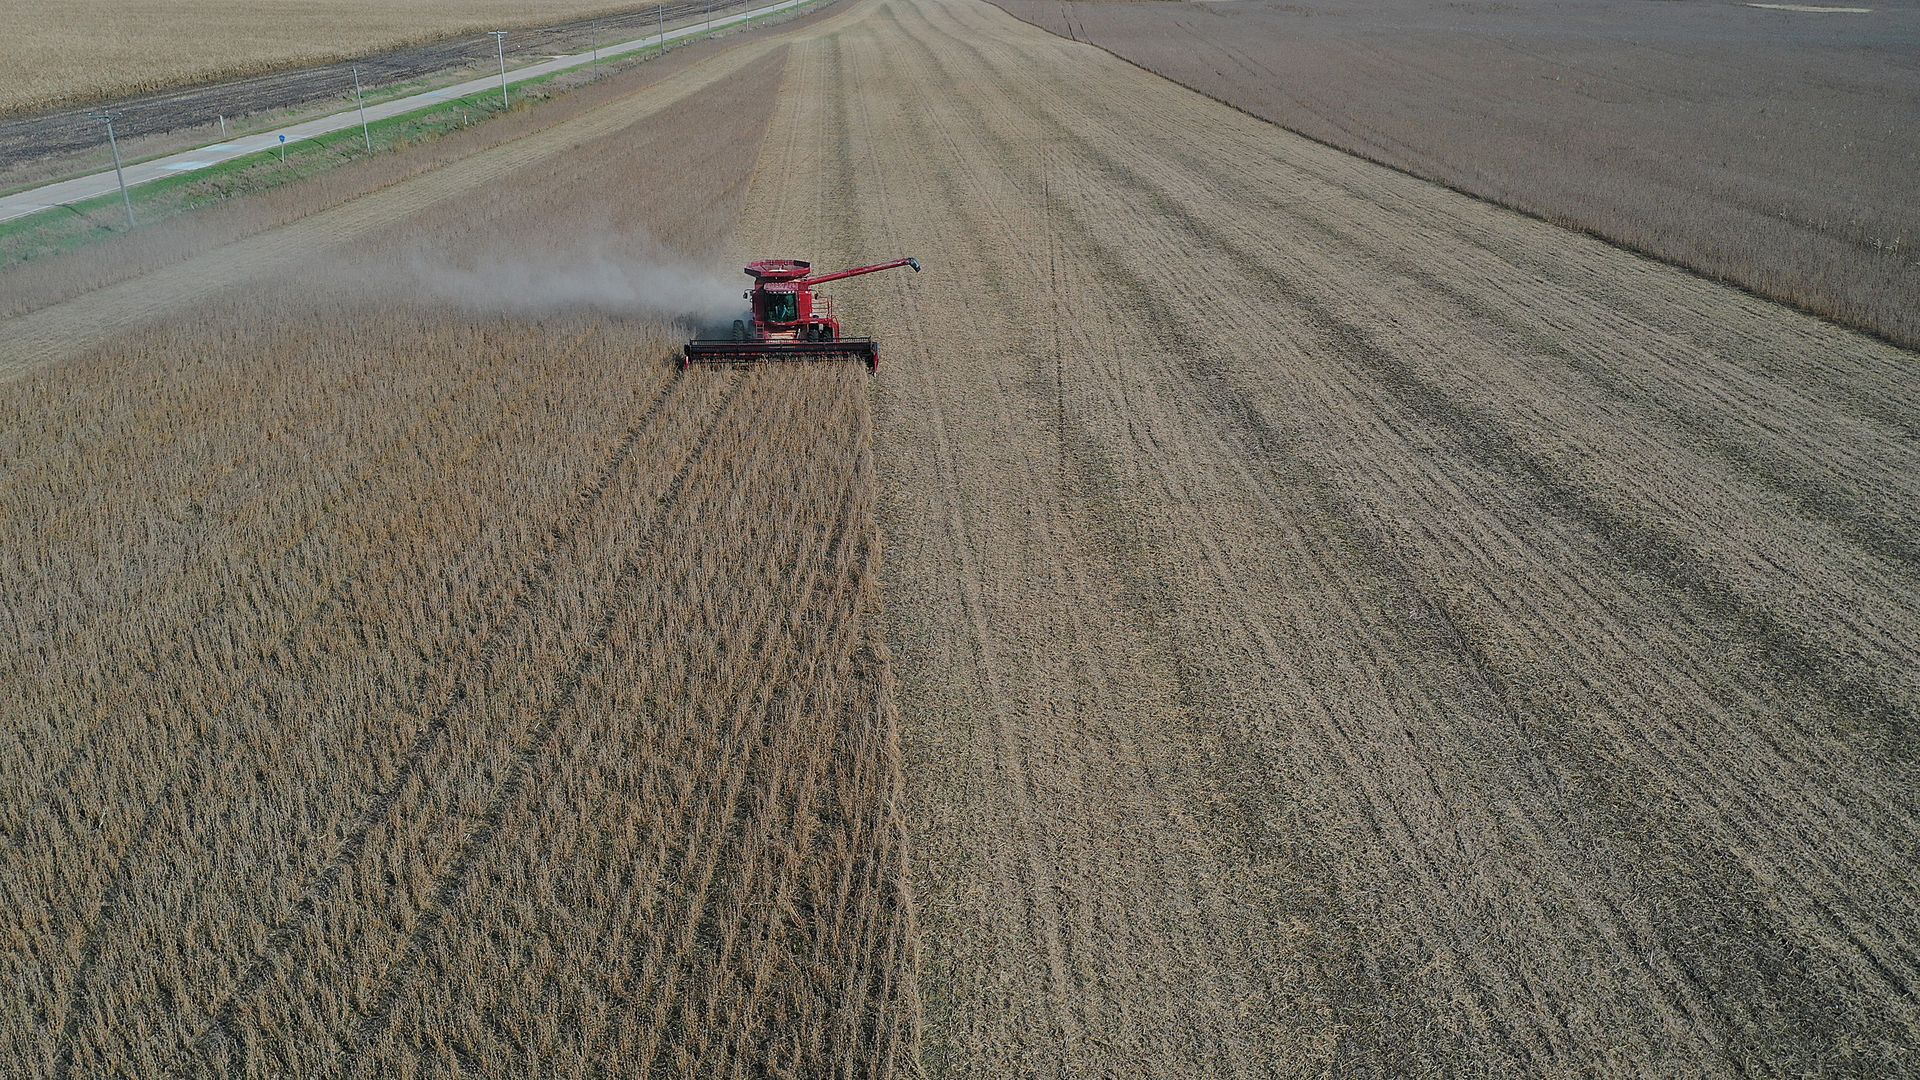 In this image, a combine in Iowa harvests soybeans in a large field